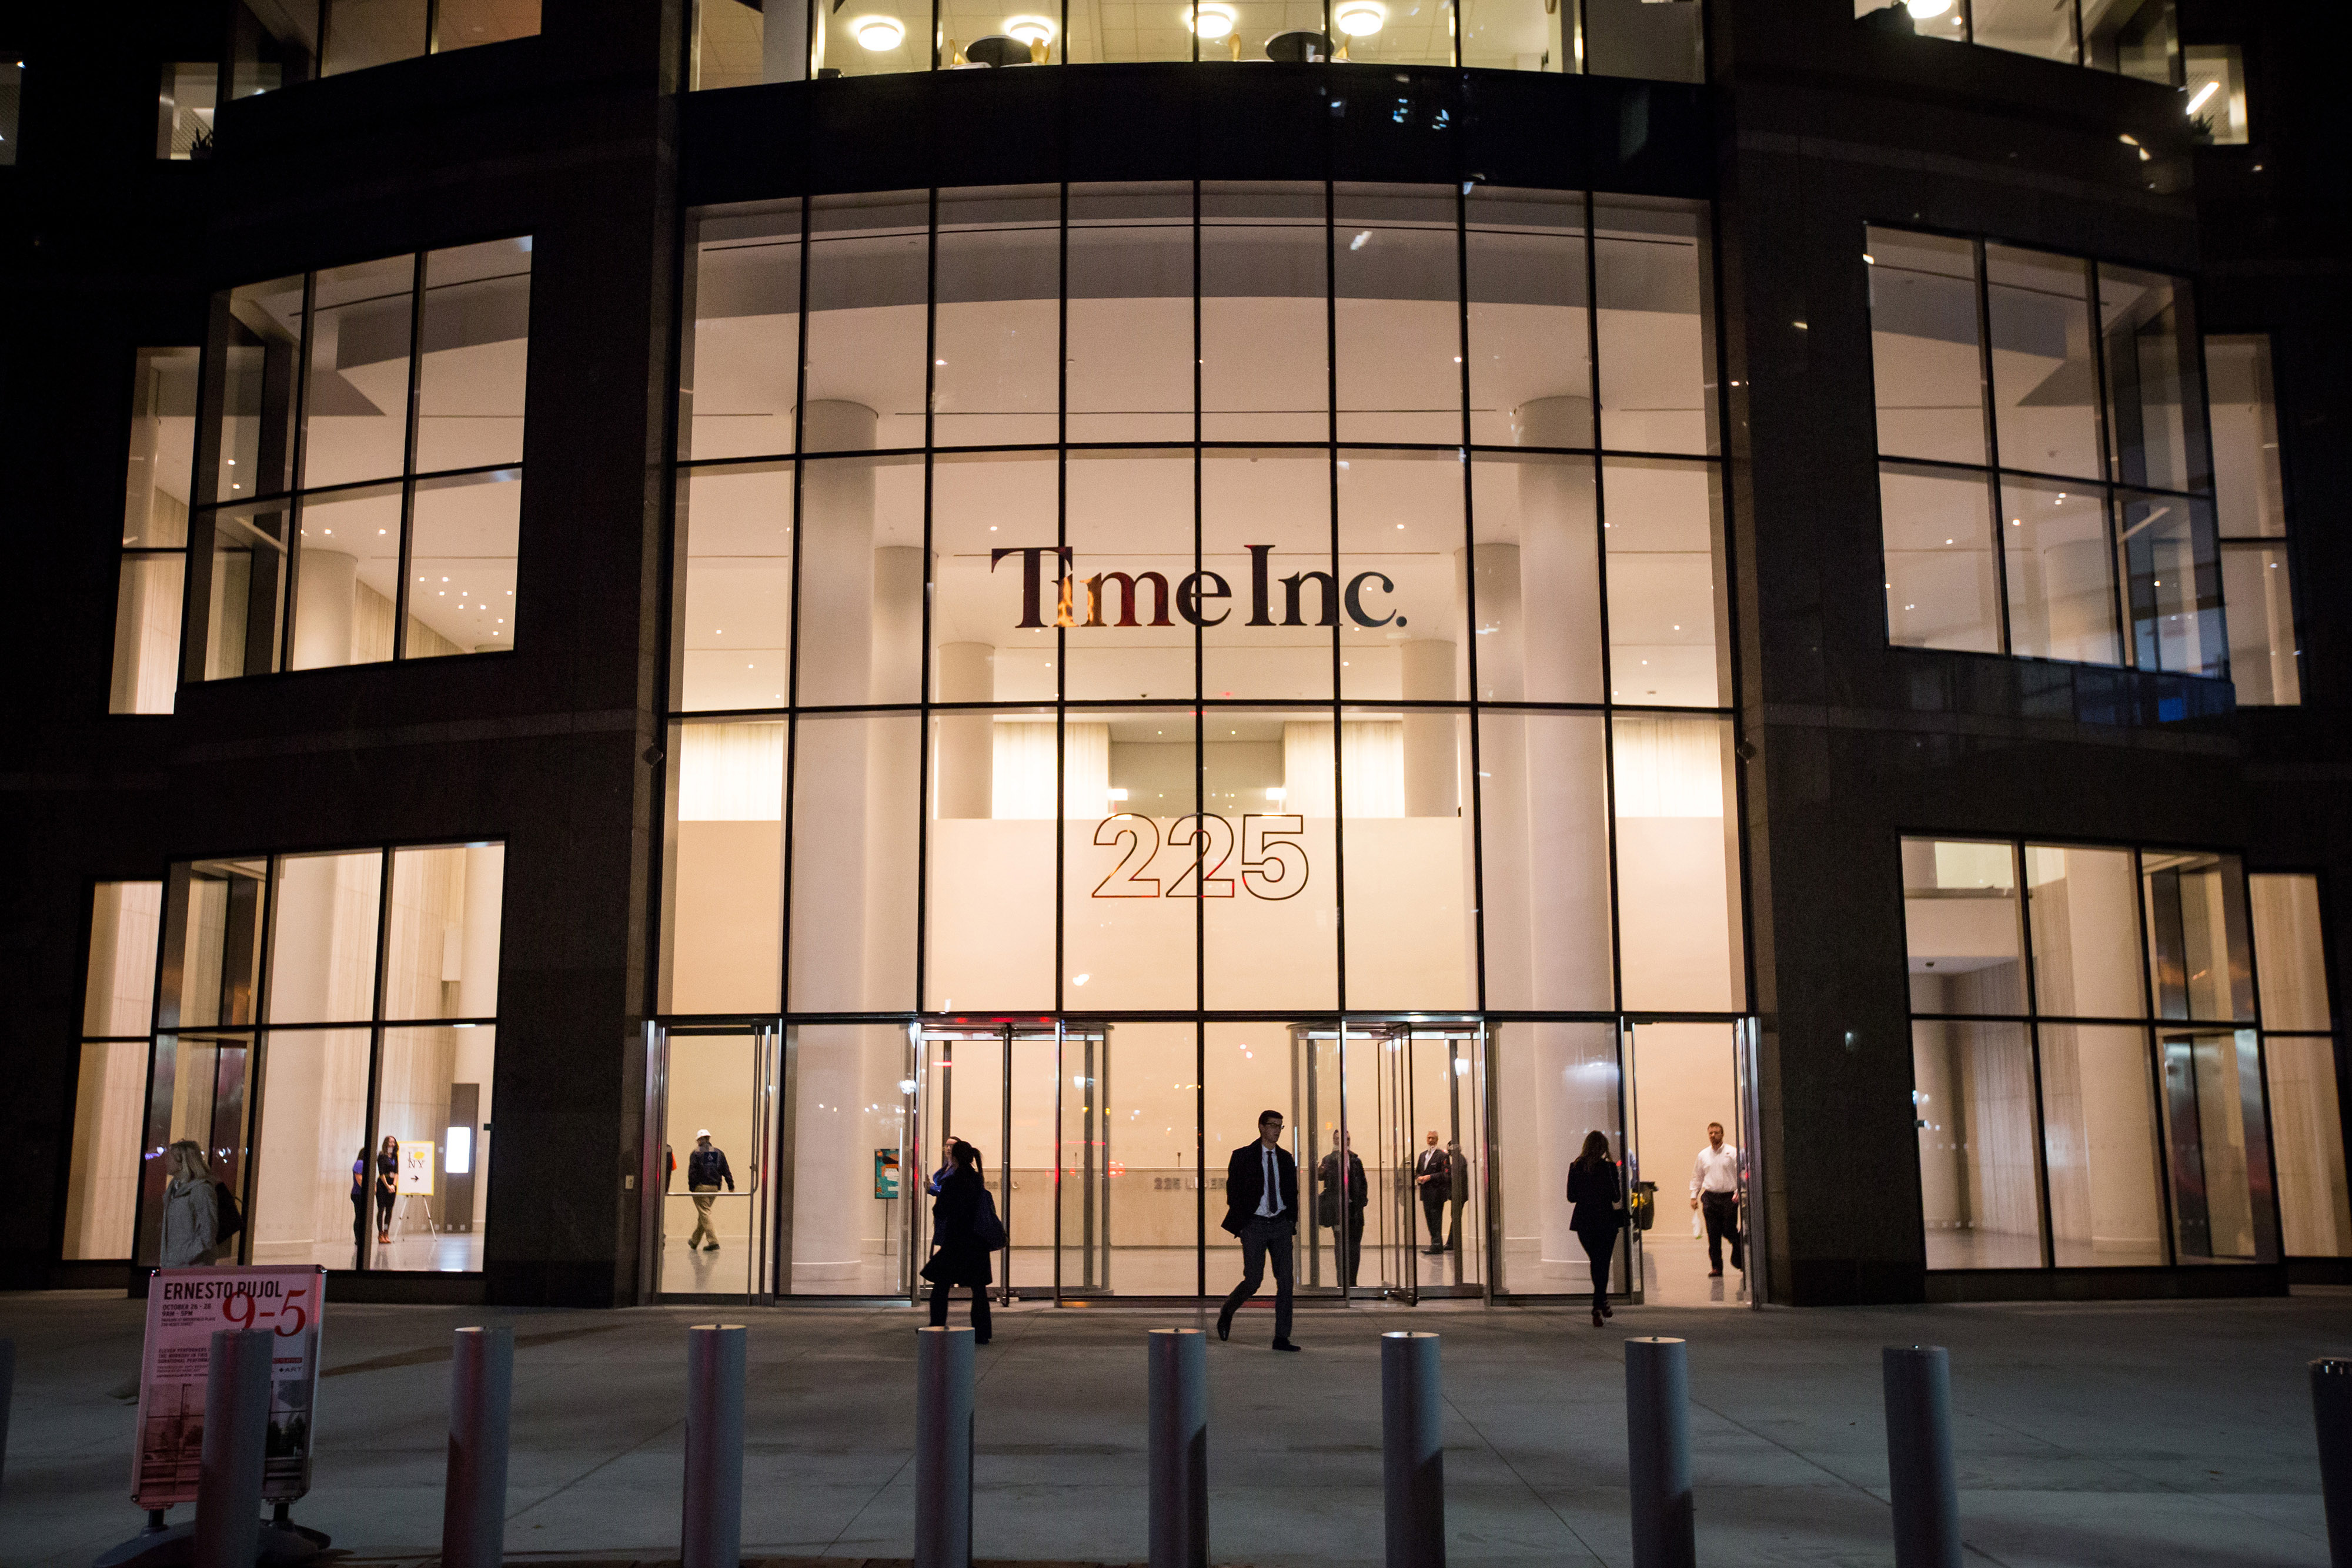 Pedestrians walk past the new headquarters of Time Inc. in New York, N.Y, on Tuesday, Oct. 27, 2015. (Michael Nagle—Bloomberg/Getty Images)